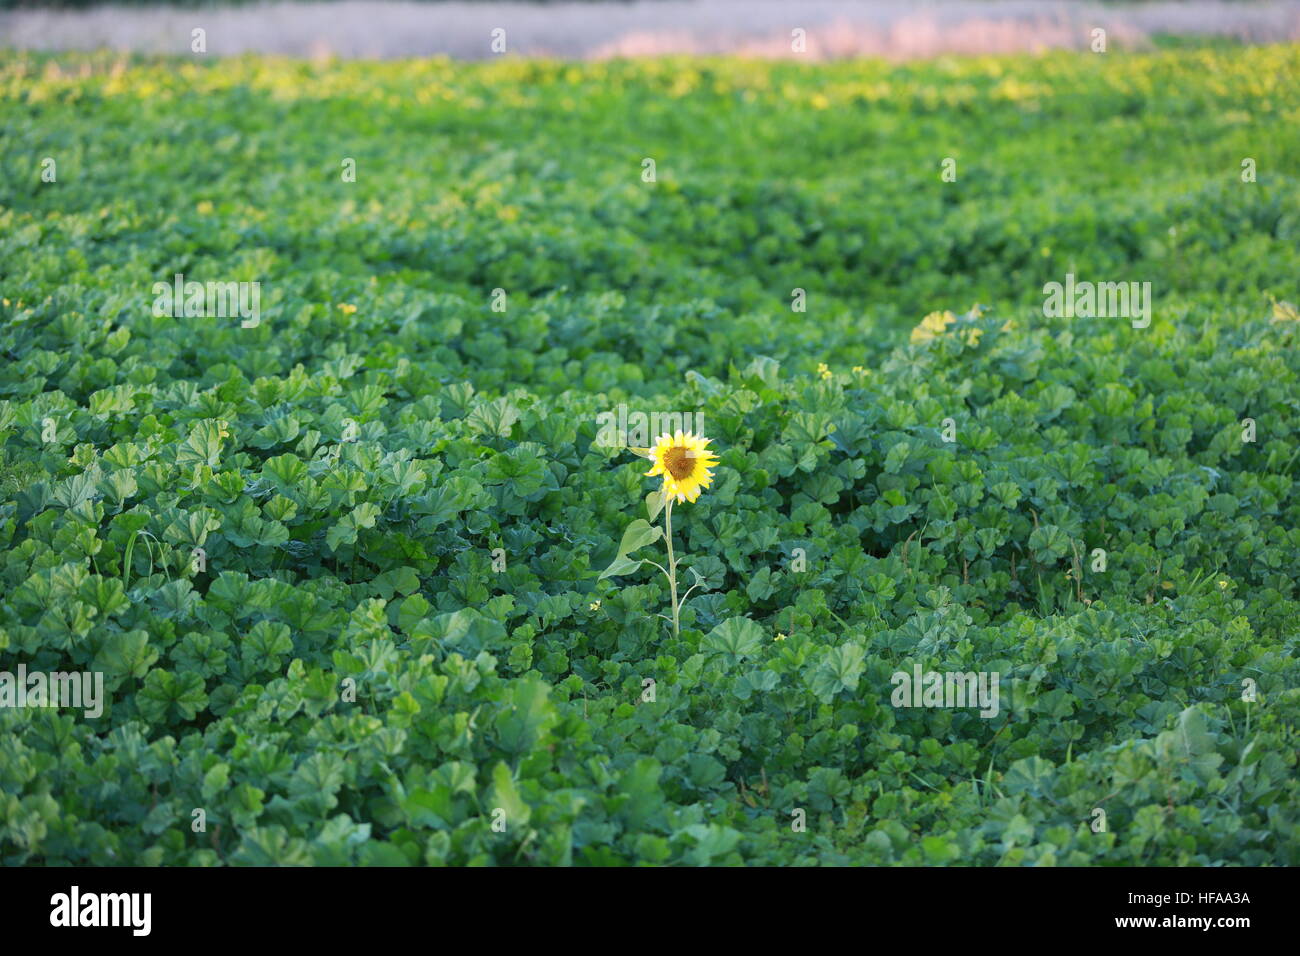 lone sunflower in a field of green foliage Stock Photo